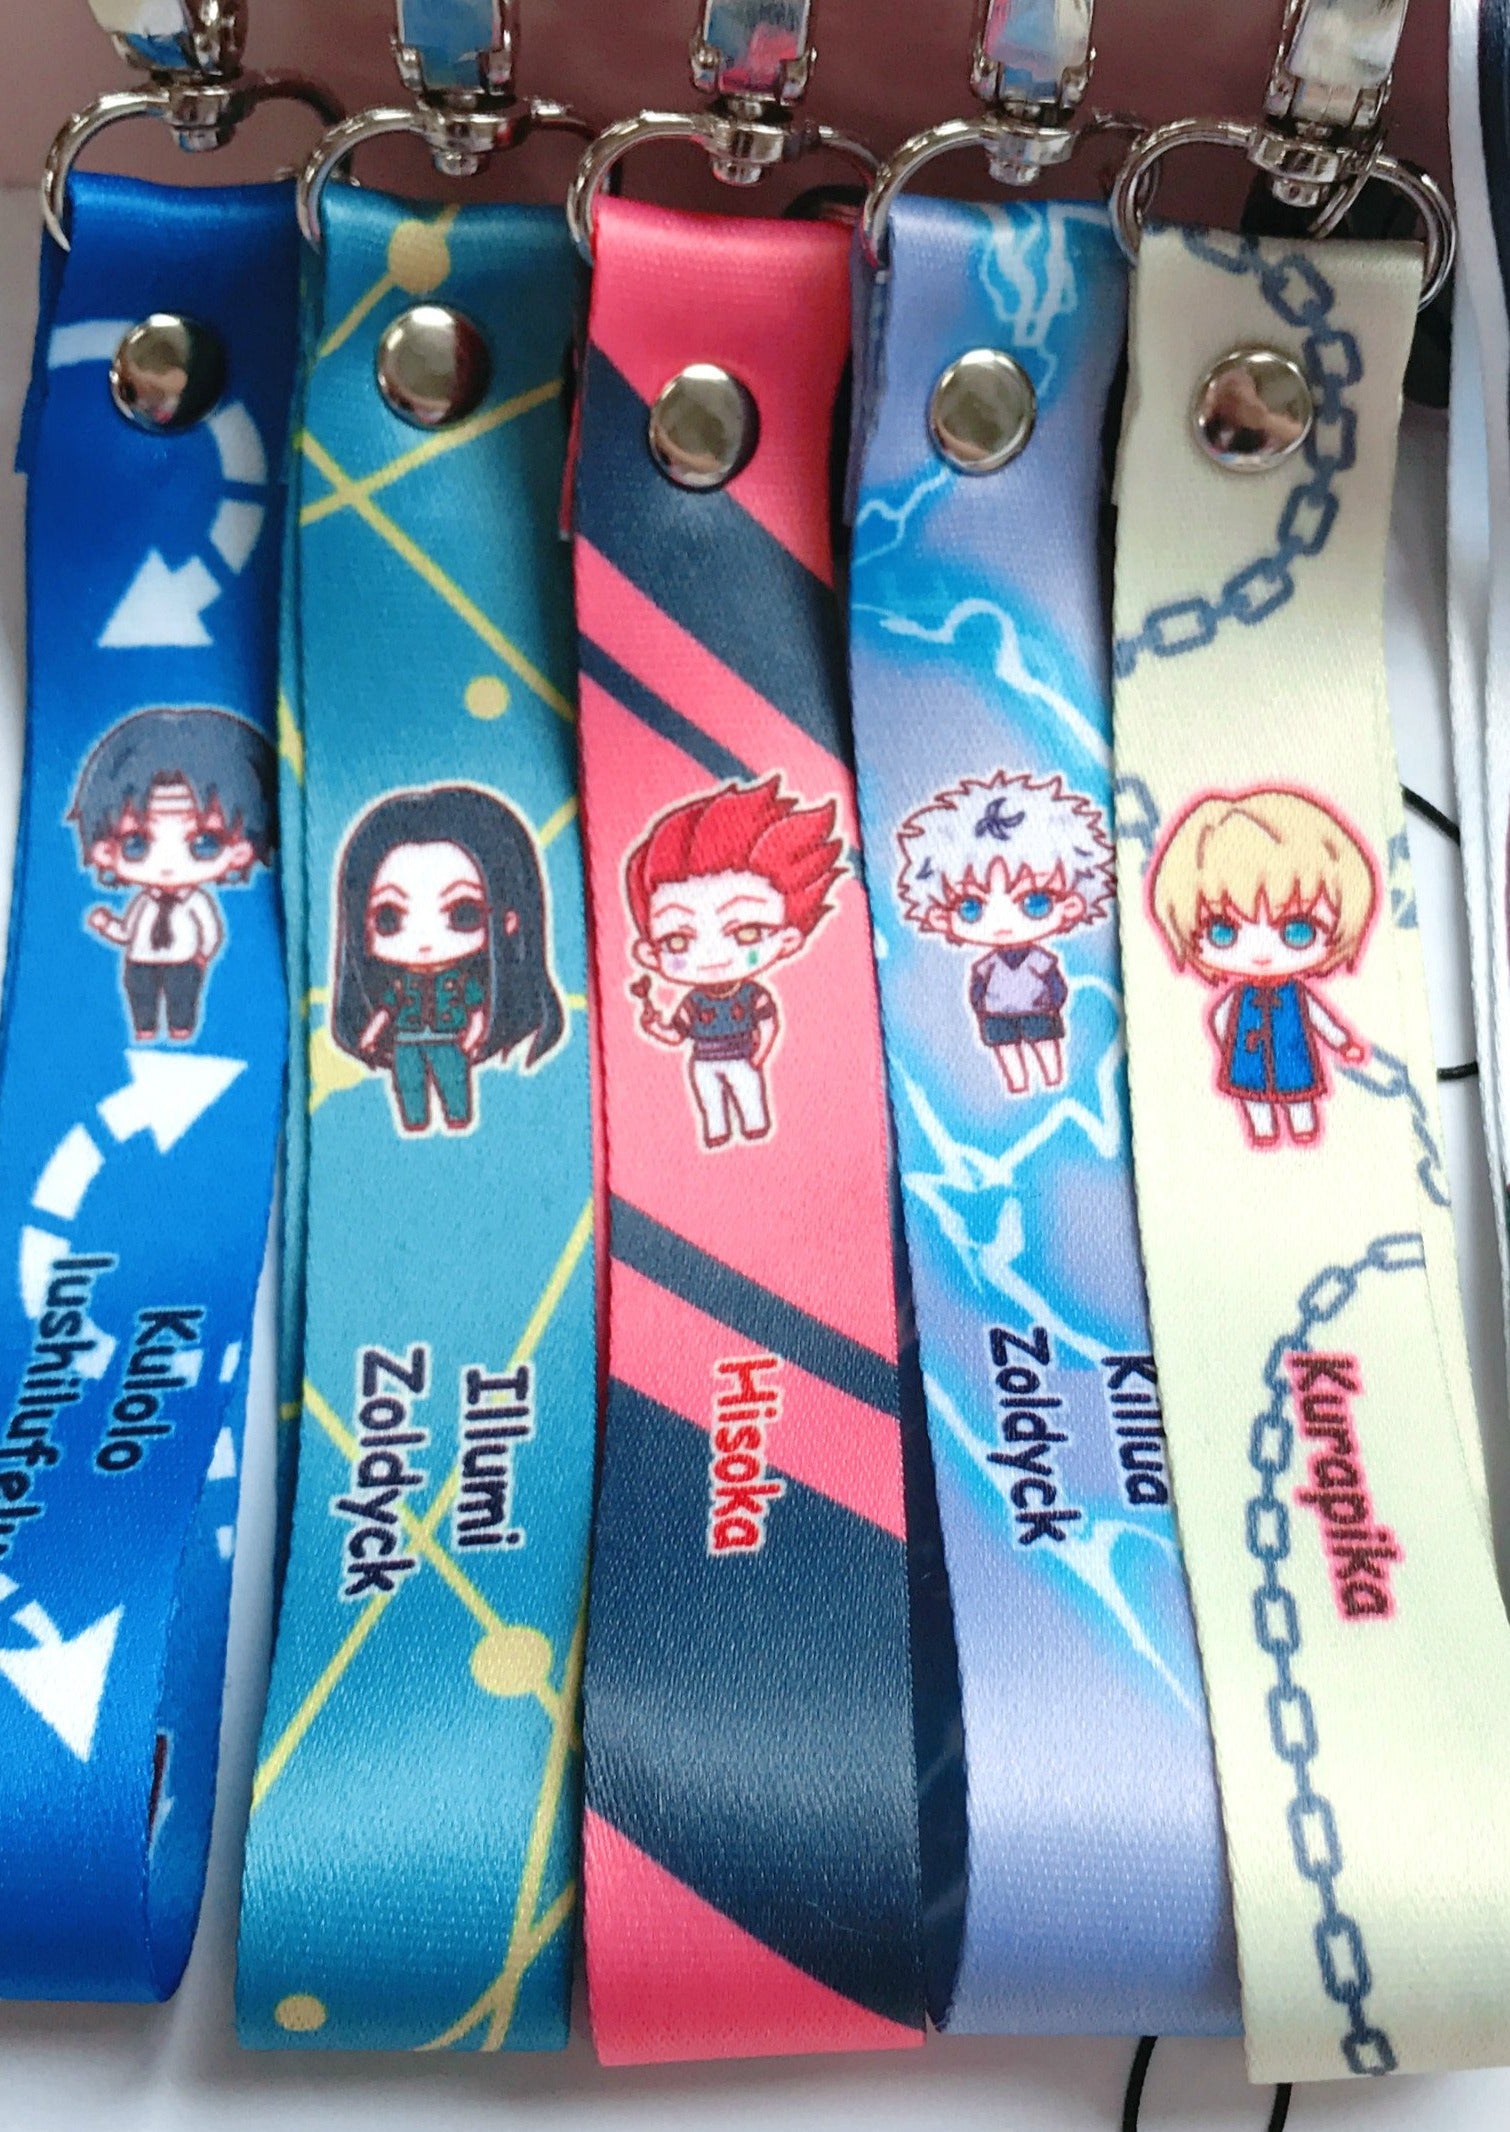 Buy TJIUSI Cute Anime Lanyard for Kids with ID Badge Holder Neck Lanyard  with Kawaii Anime Keychain Anime ID Card Badge Holder and Anya icon  Keychains for Women Men Teens Gifts Online